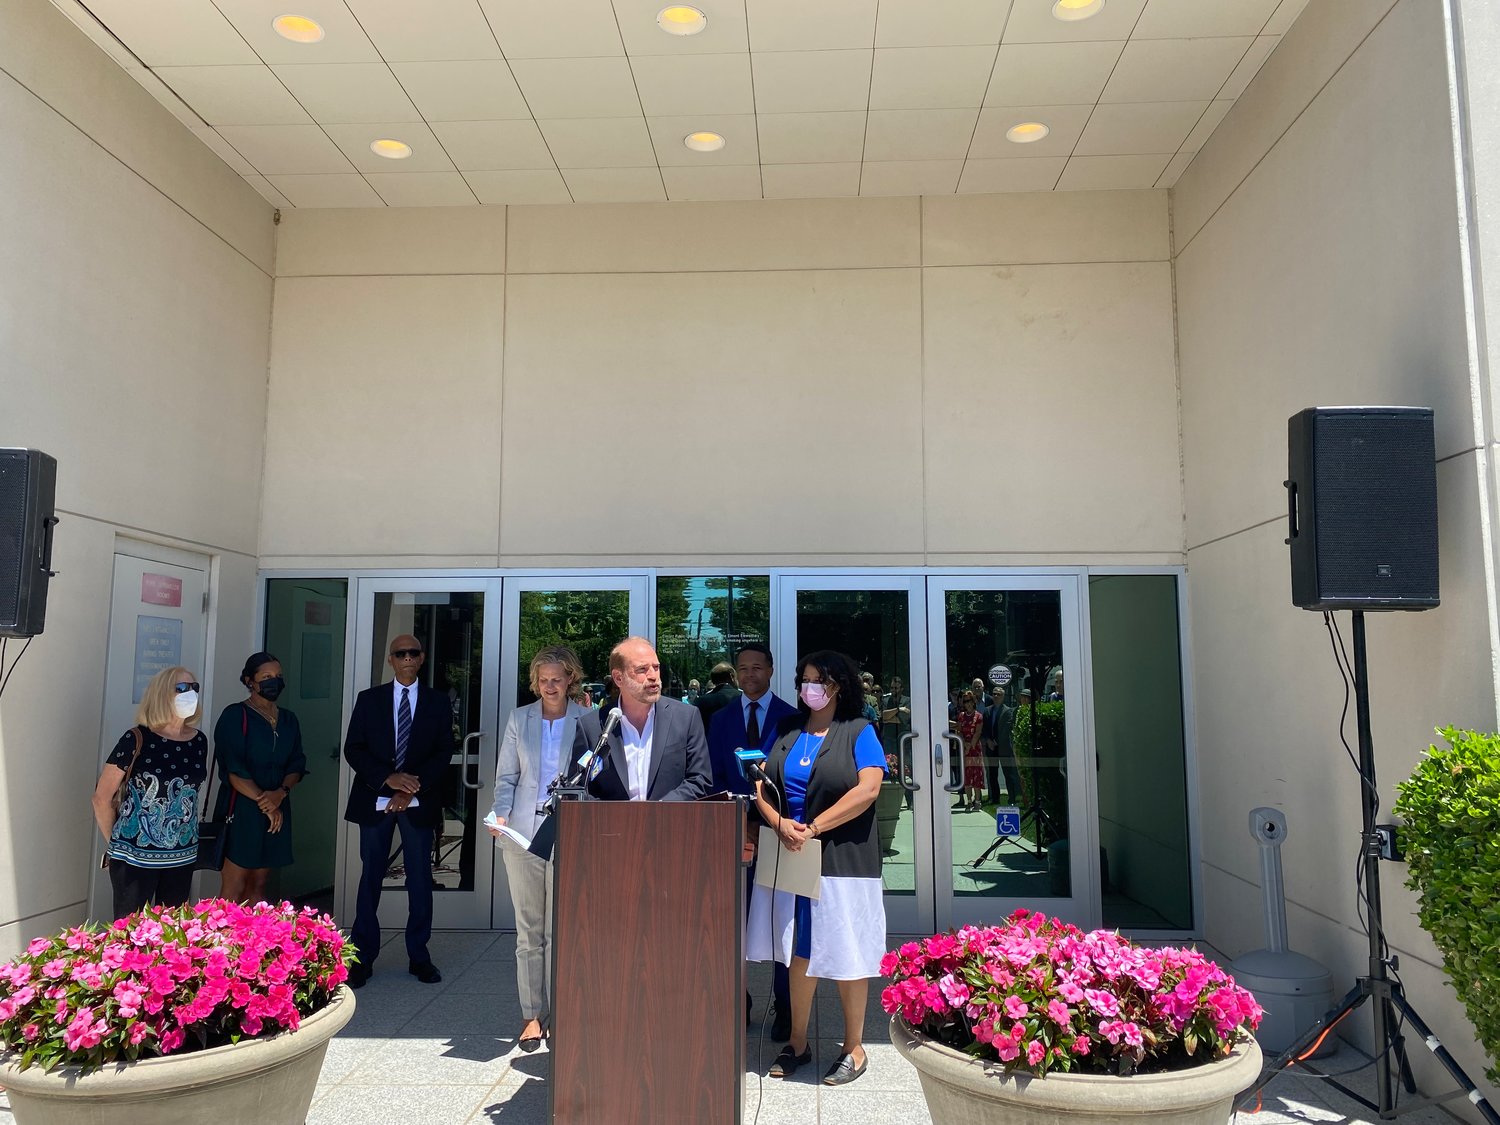 Plaza Theatrical Producer Kevin F. Harrington, left, was joined by Nassau County Executive Laura Curran and Elmont Library Board President Livingston Young on June 23 to announce the opening of a new musical theater.